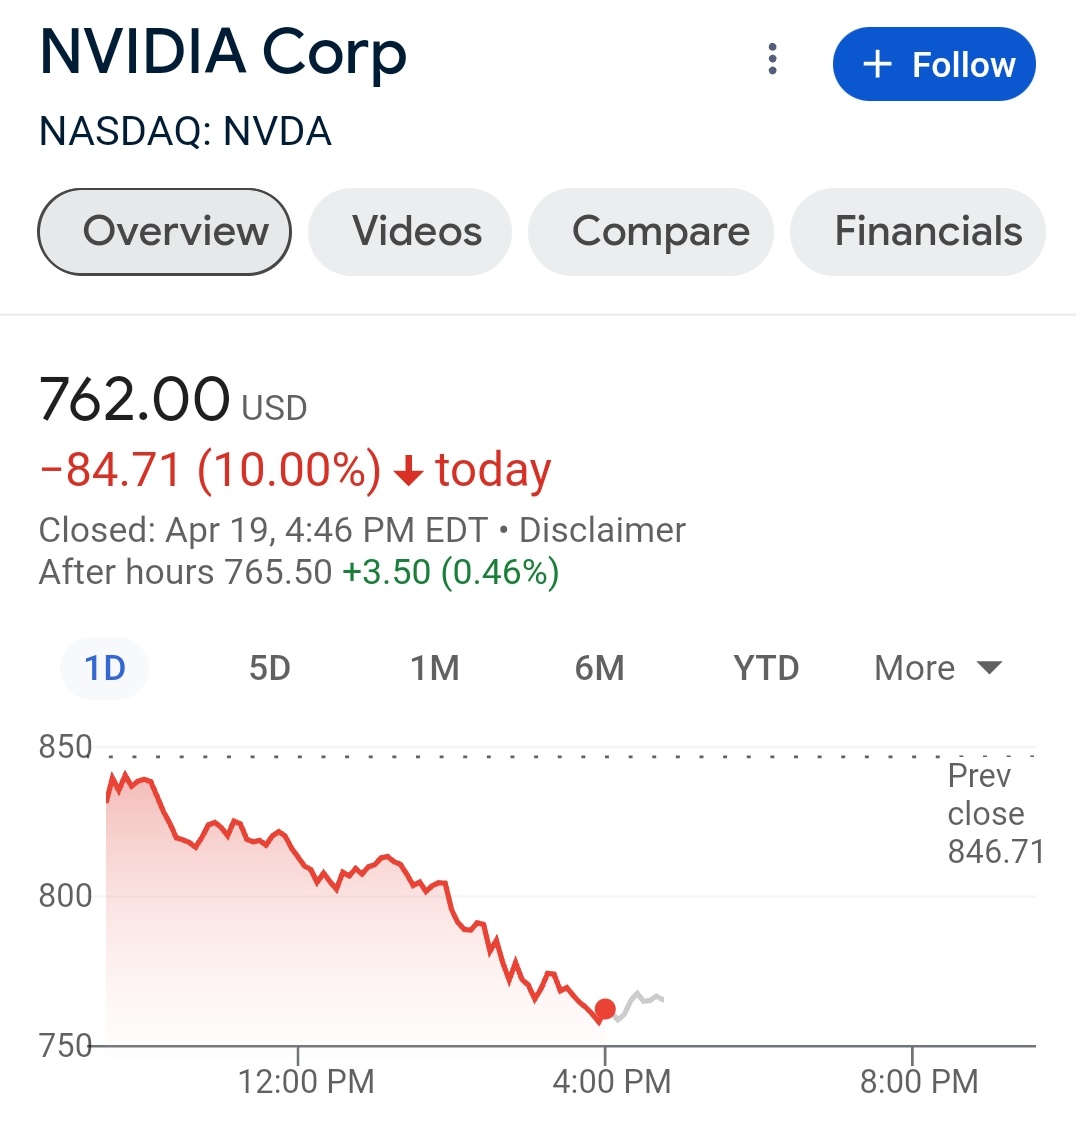 $NVDA ends the day down -10%, losing almost $213 billion in market value. 📉 #Nvidia #AI #Stockmarkets #BitcoinHalving #Halving